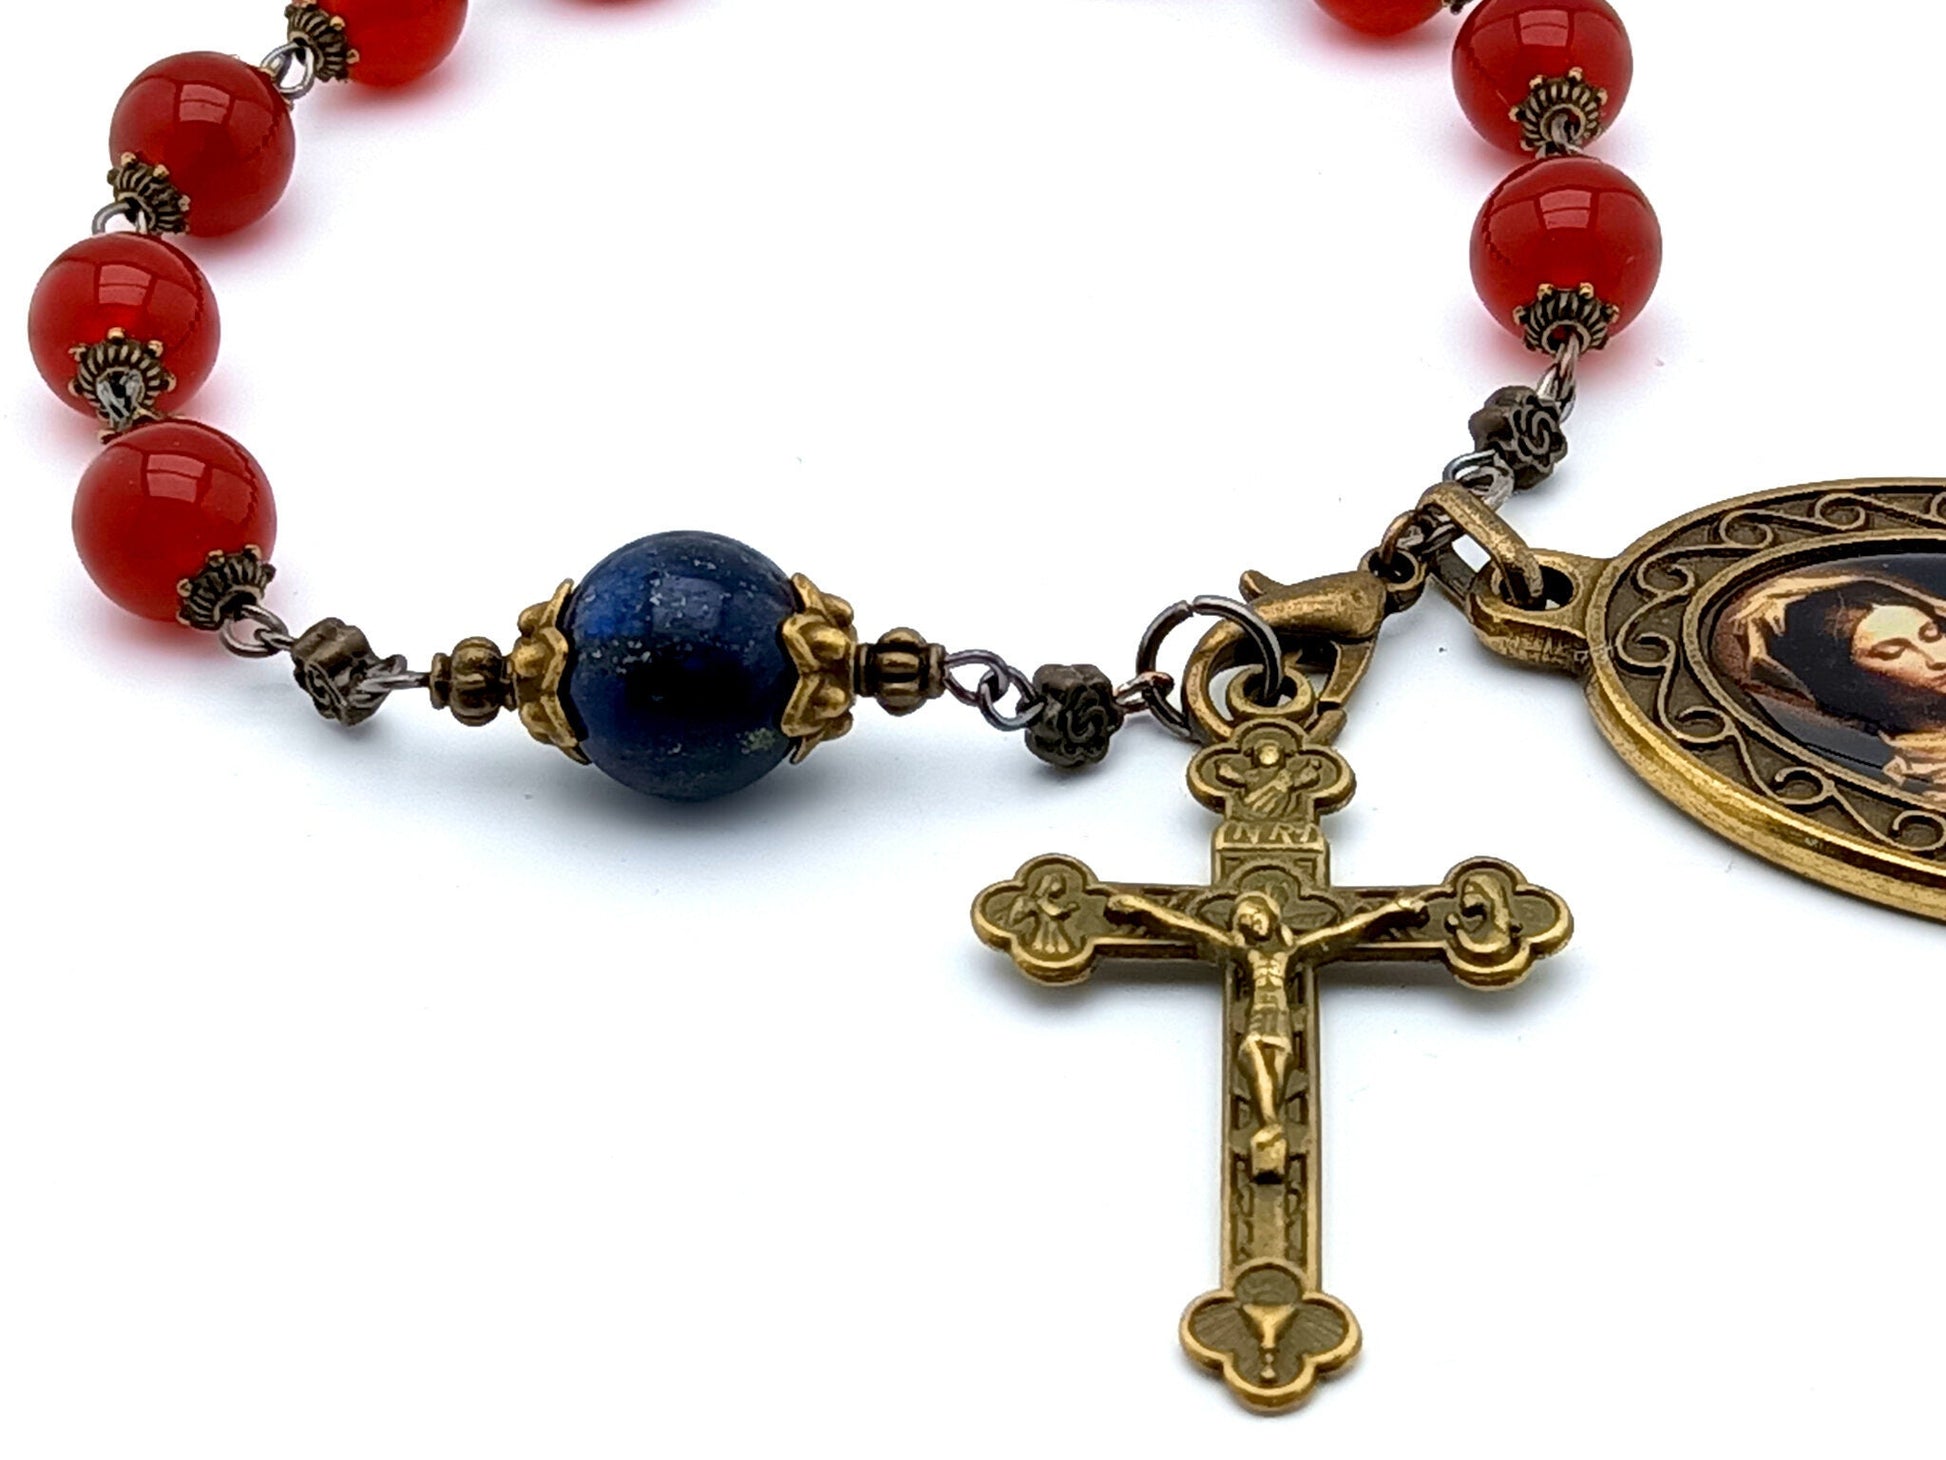 Our Lady of Divine Providence unique rosary beads single decade rosary with ruby and lapis lazuli gemstone beads, bronze crucifix and picture medal.